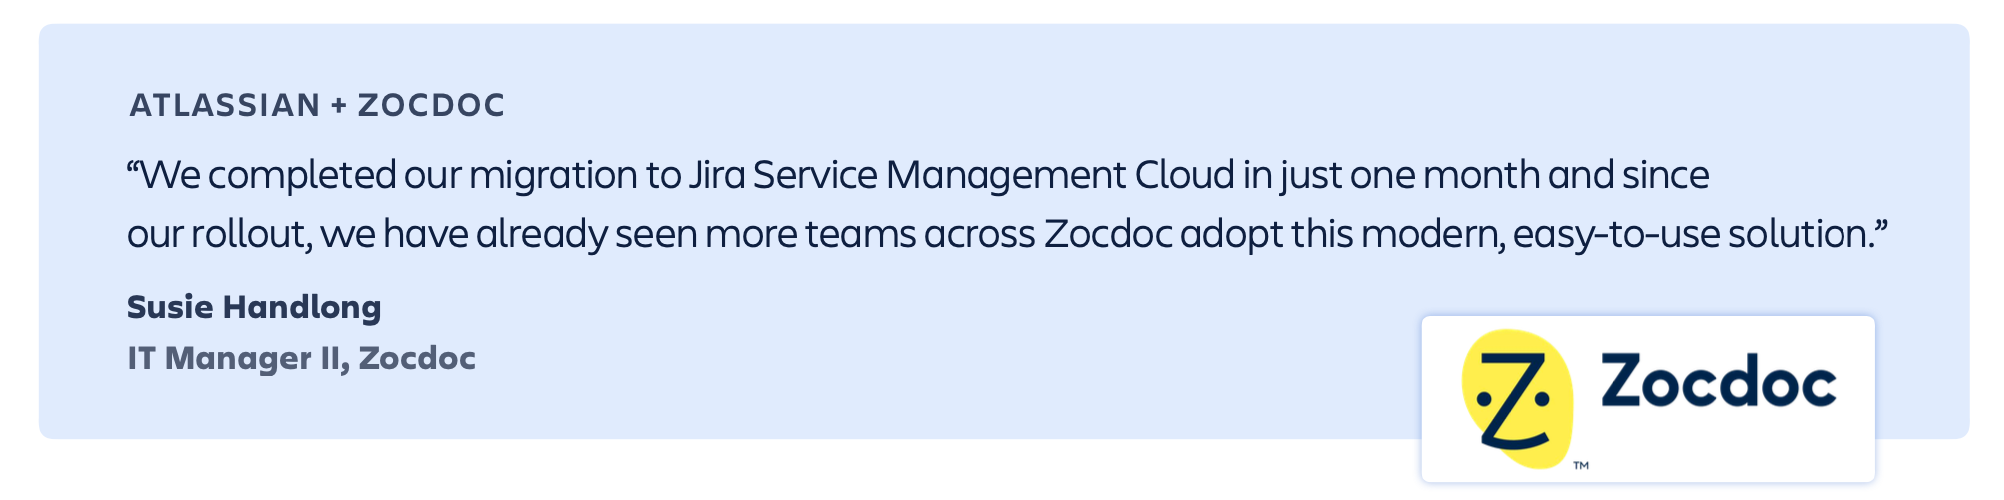 “We completed our migration to Jira Service Management Cloud in just one month and since our rollout, we have already seen more teams across Zocdoc adopt this modern, easy-to-use solution.” – Susie Handlong, IT Manager II, Zocdoc